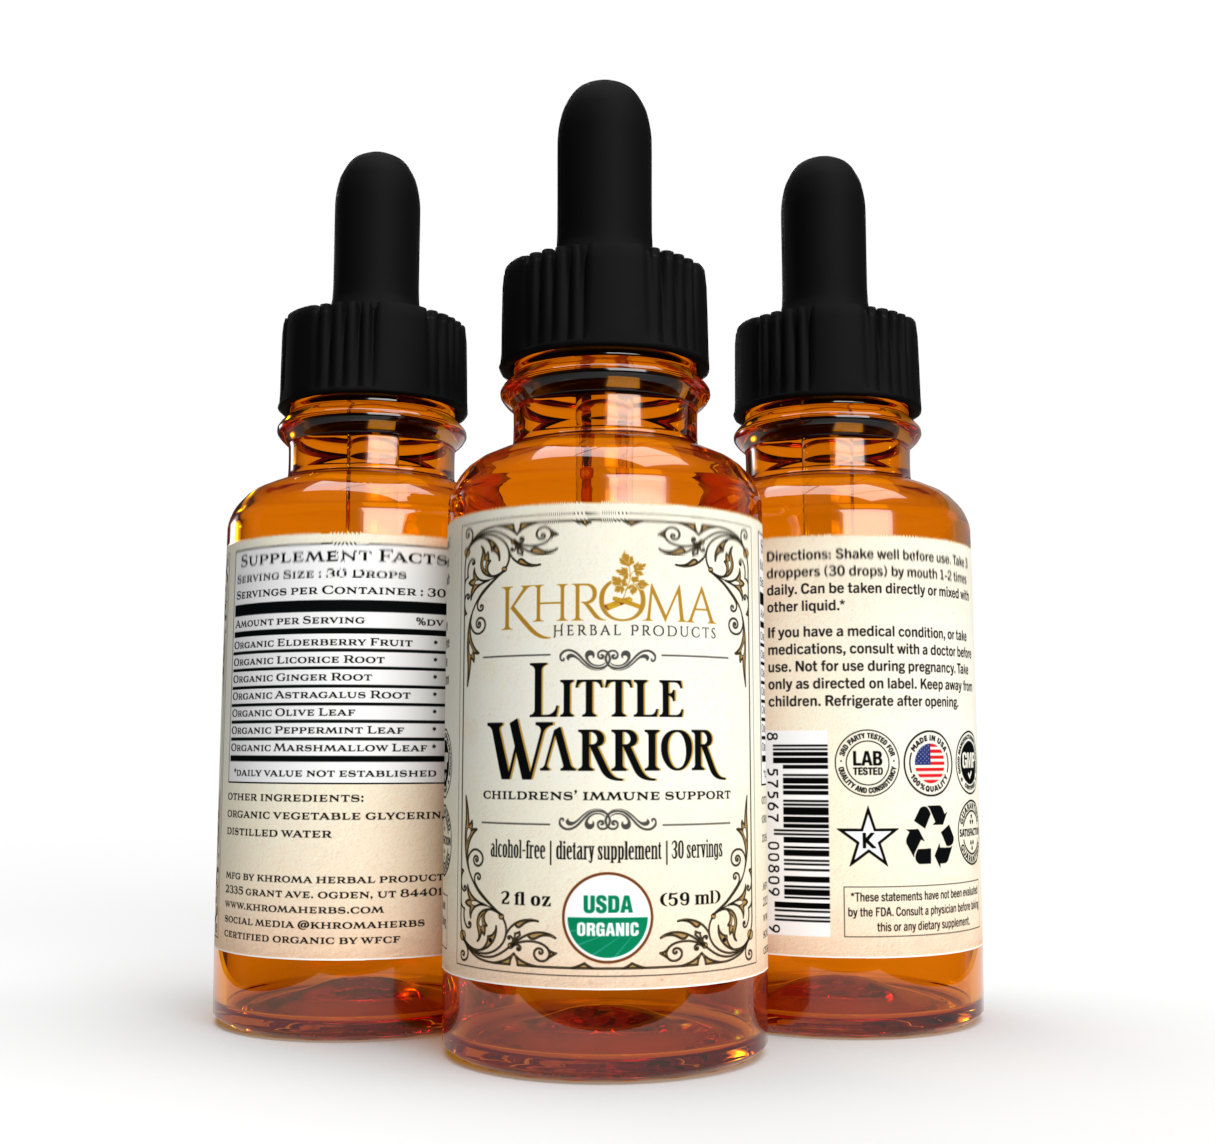 LITTLE WARRIOR - For Your Child's Immune System